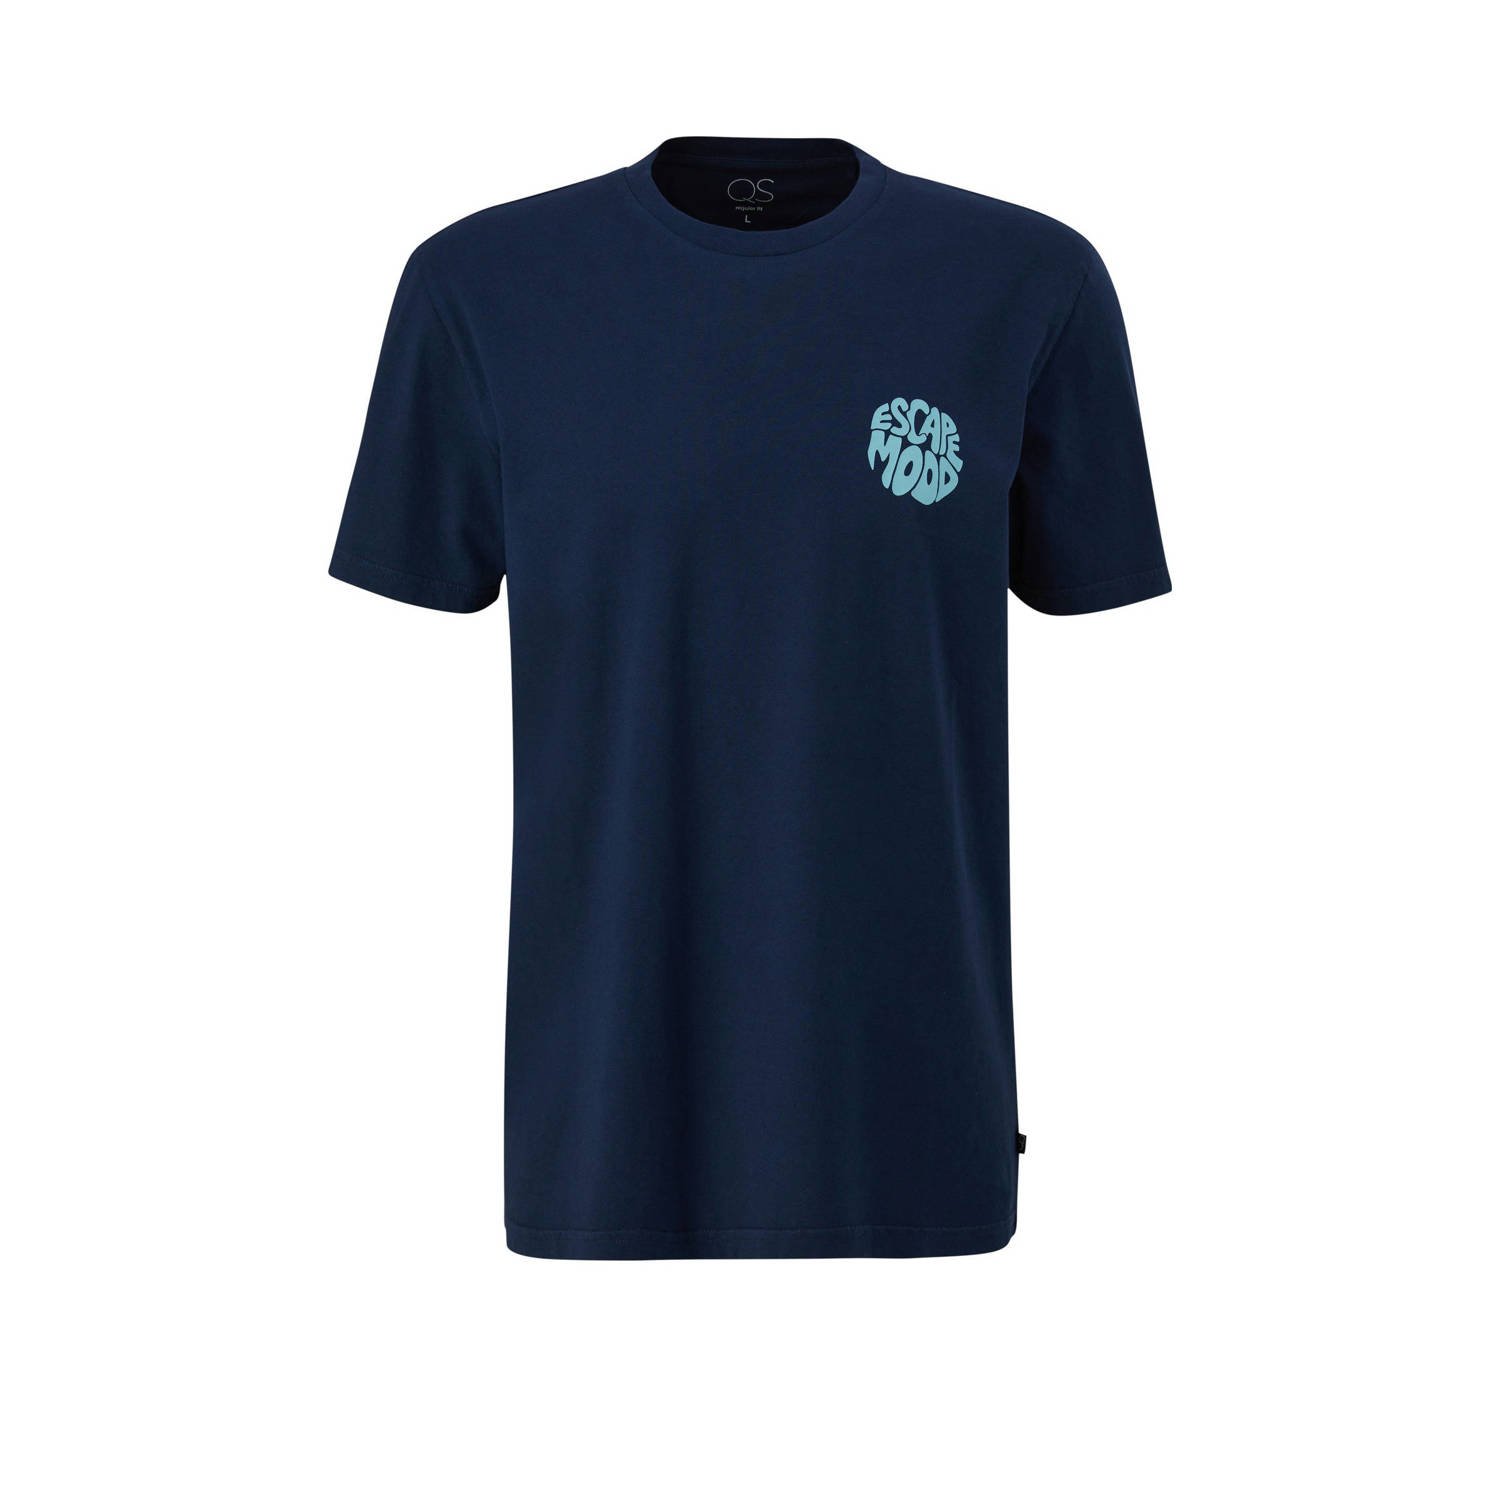 Q S by s.Oliver slim fit T-shirt met printopdruk donkerblauw